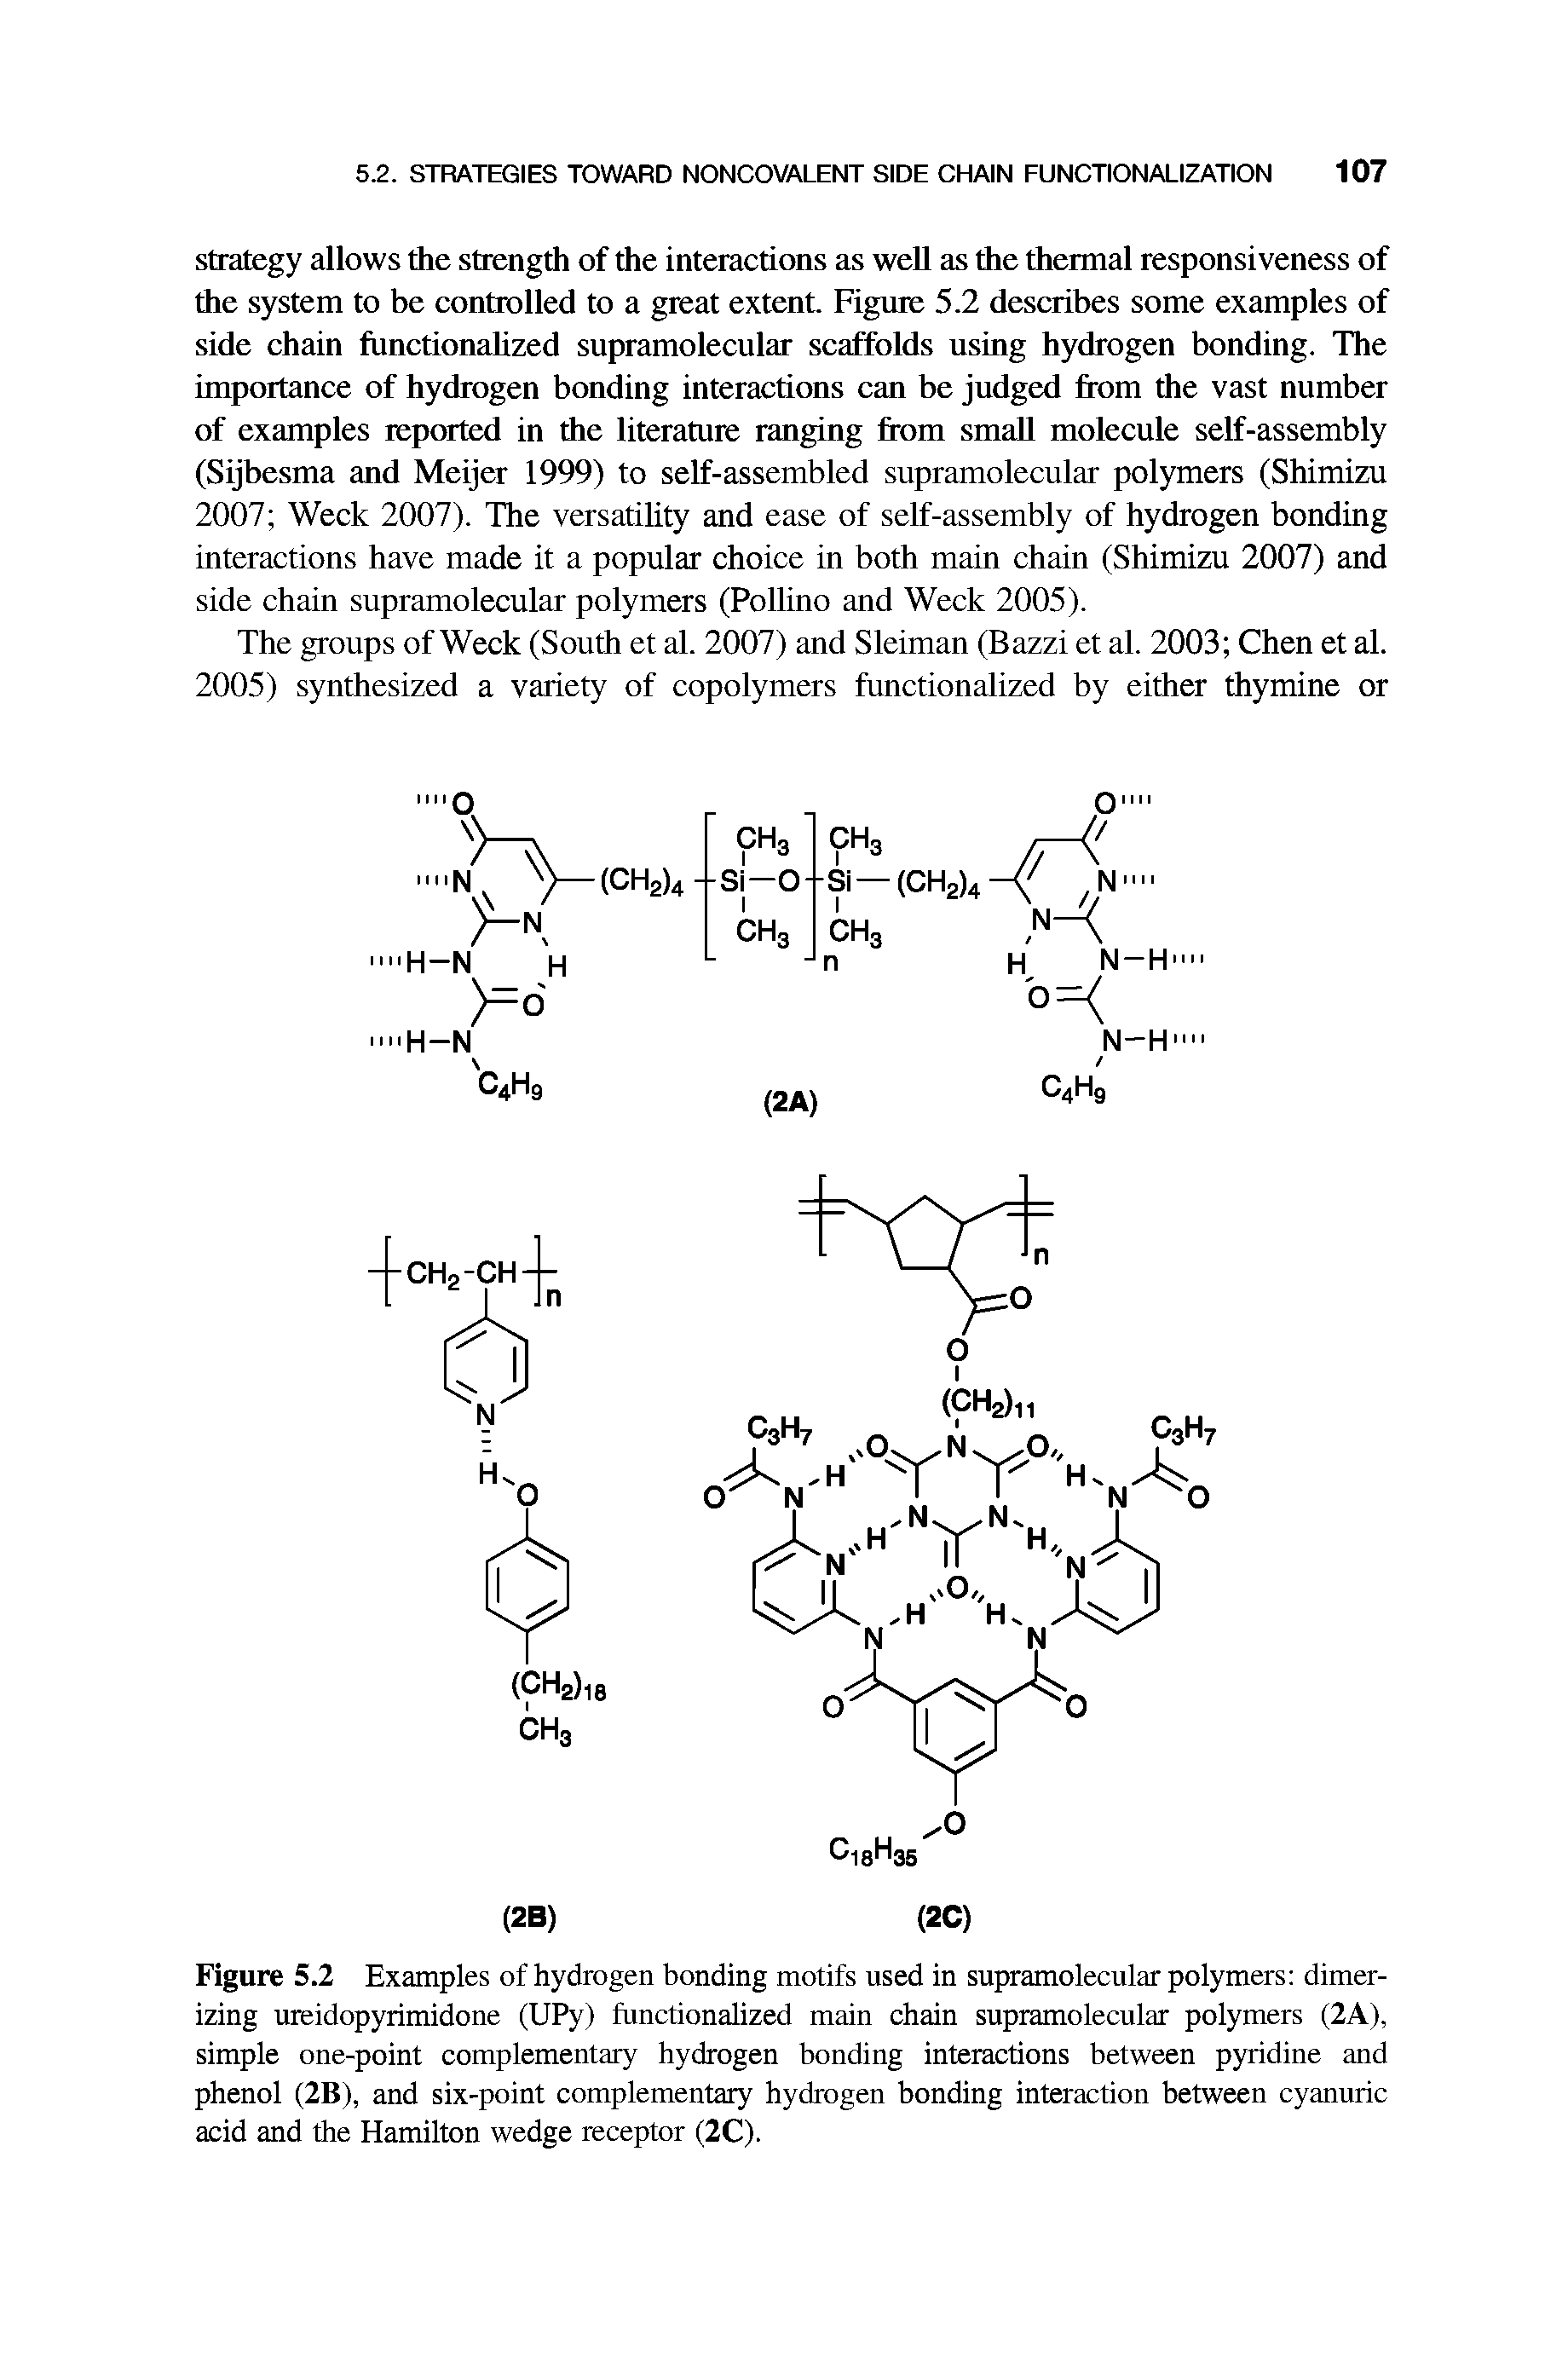 Figure 5.2 Examples of hydrogen bonding motifs used in supramolecular polymers dimerizing uieidopyrimidone (UPy) functionalized main chain supramolecular polymers (2A), simple one-point complementary hydrogen bonding interactions between pyridine and phenol (2B), and six-point complementary hydrogen bonding interaction between cyanuric acid and the Hamilton wedge receptor (2C).